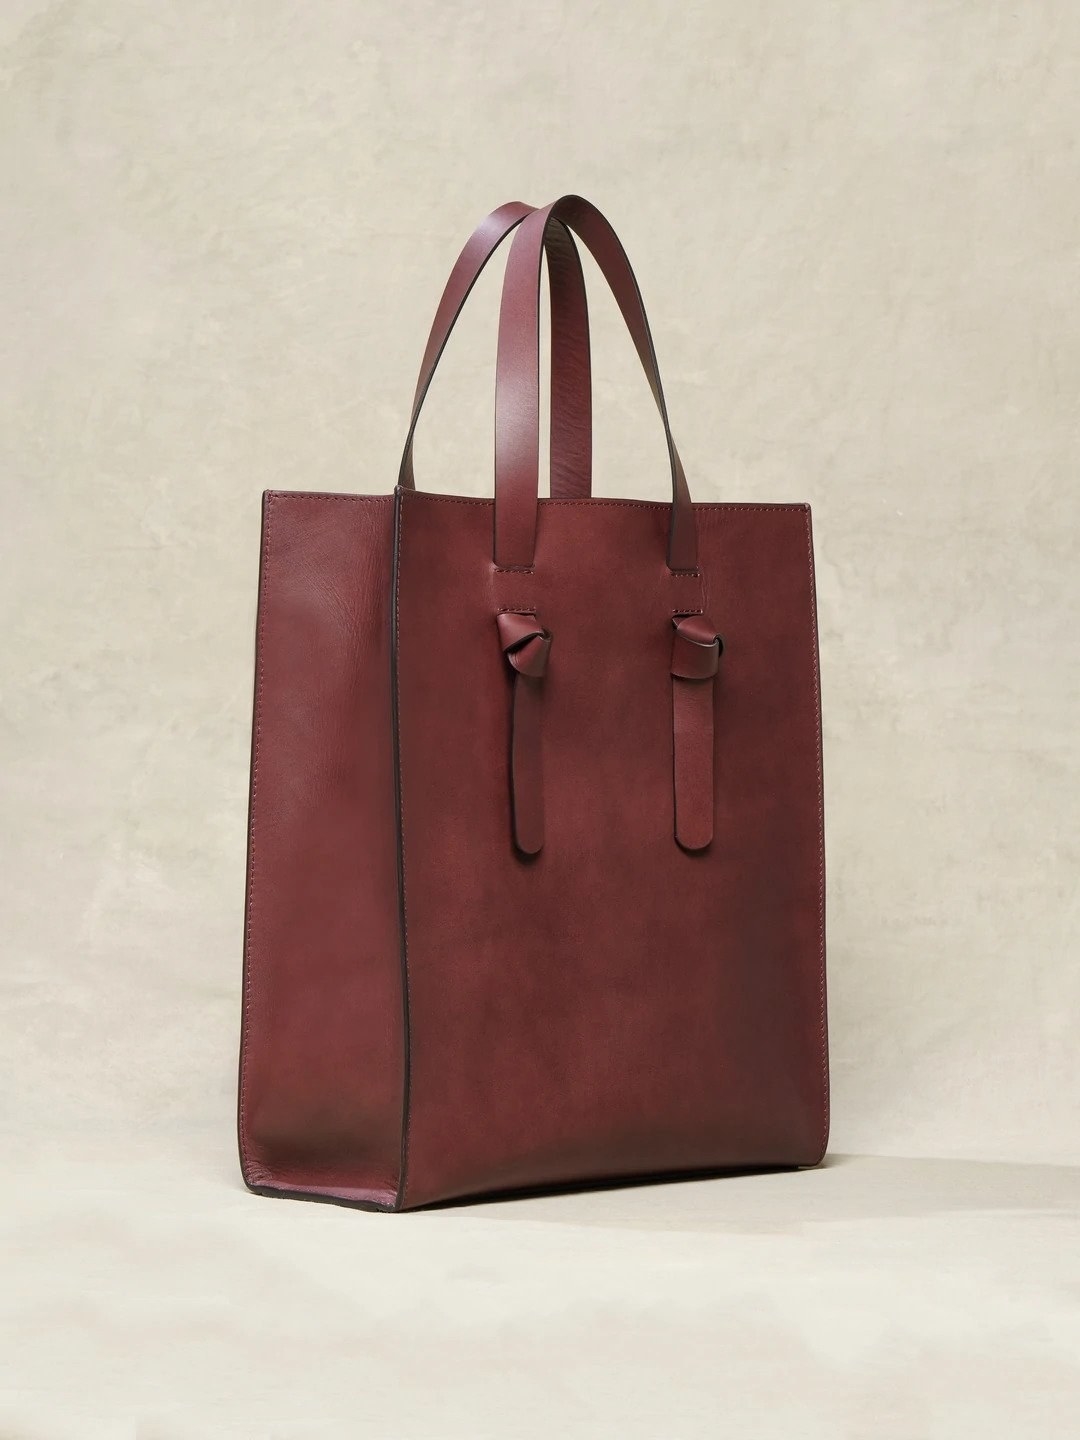 tall tote with knotted strap details